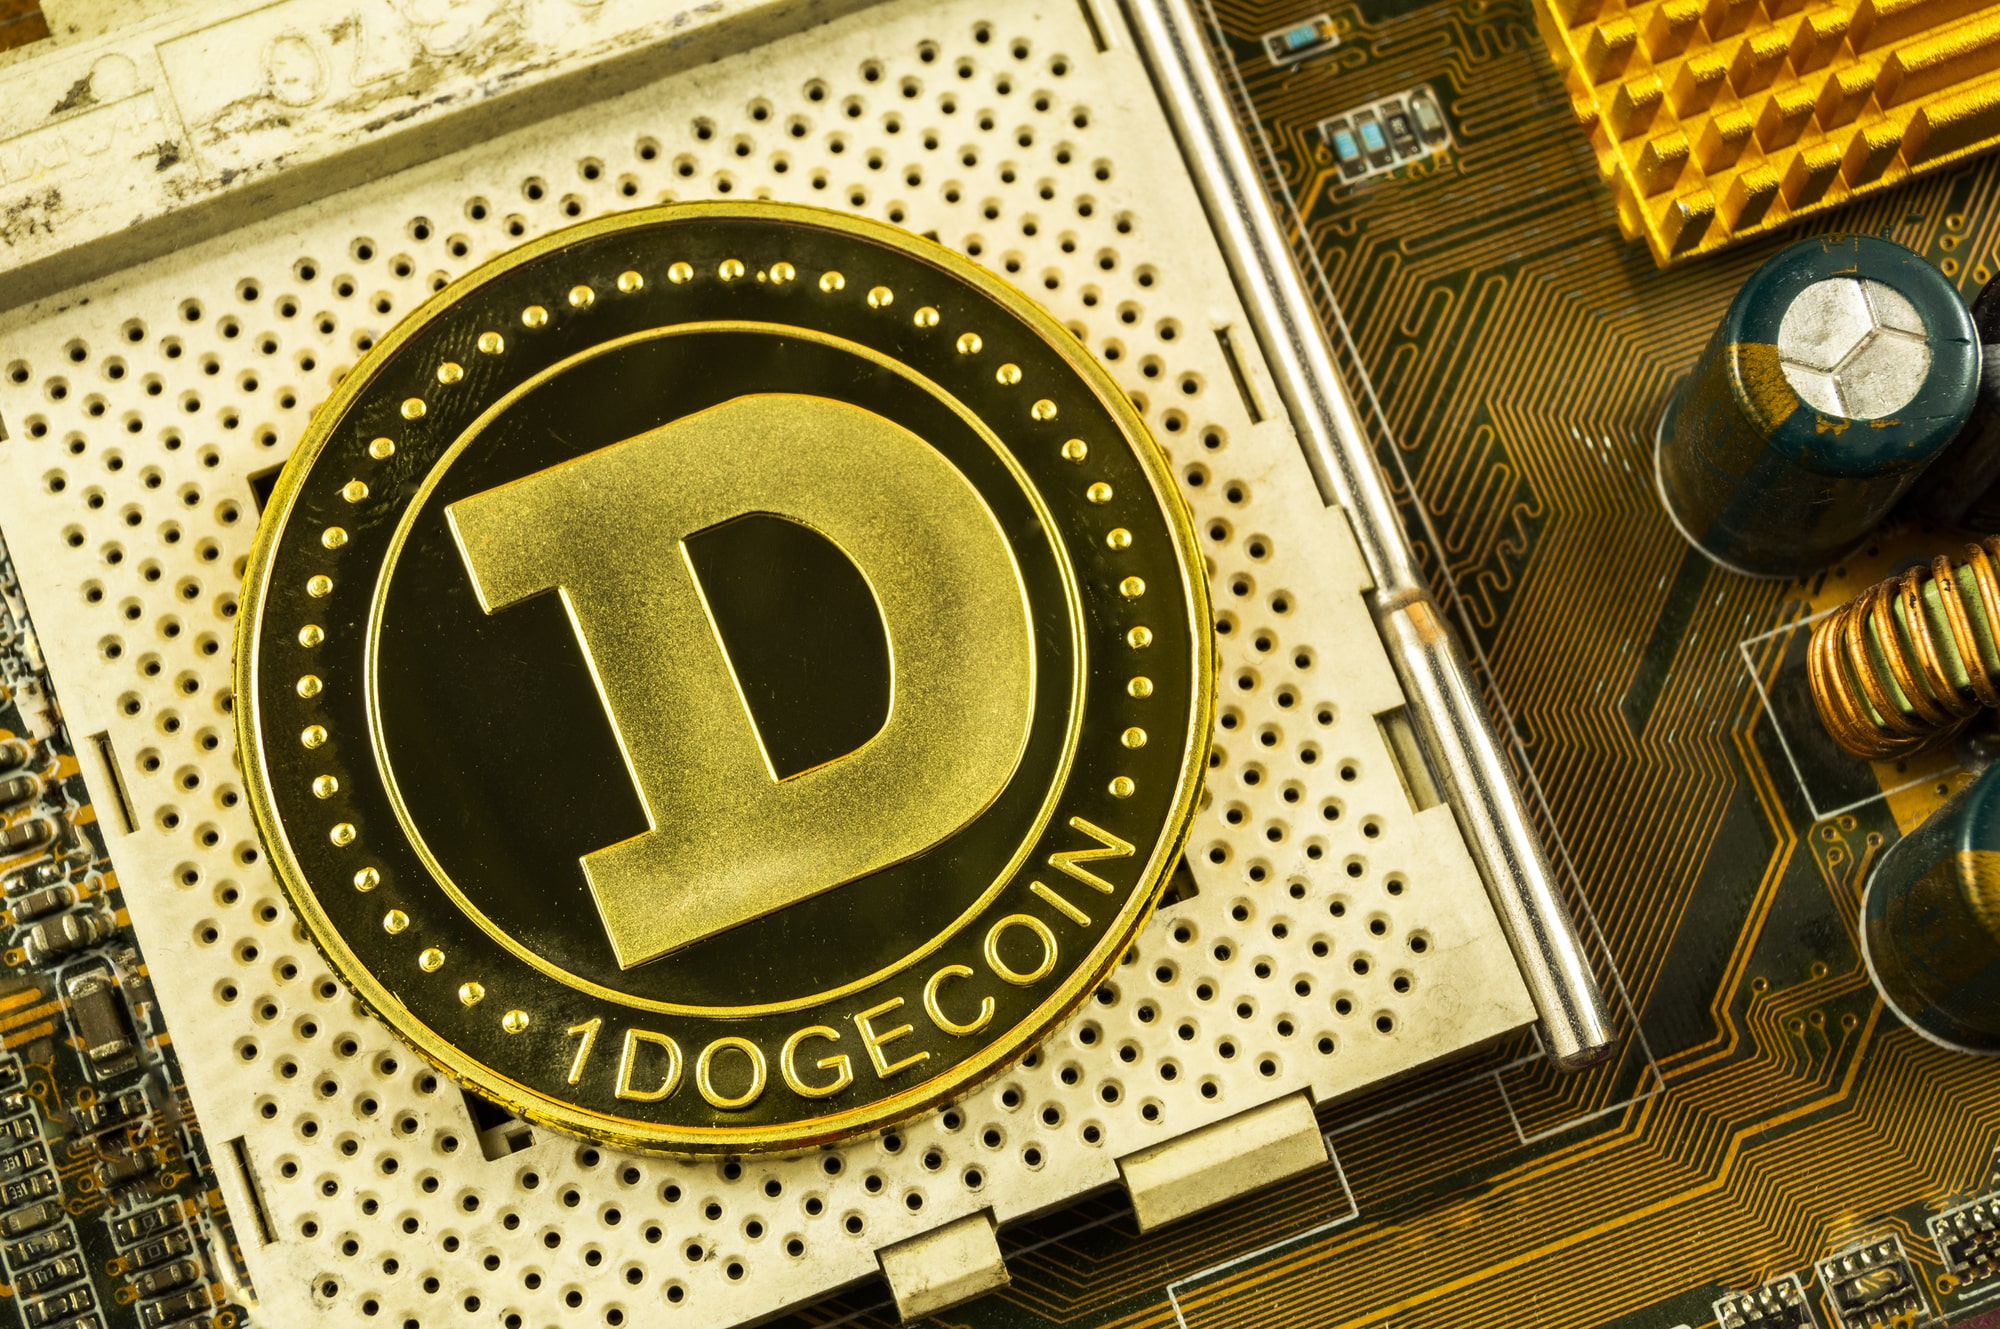 Dogecoin’s undergoing update while Elon Musk touts changes